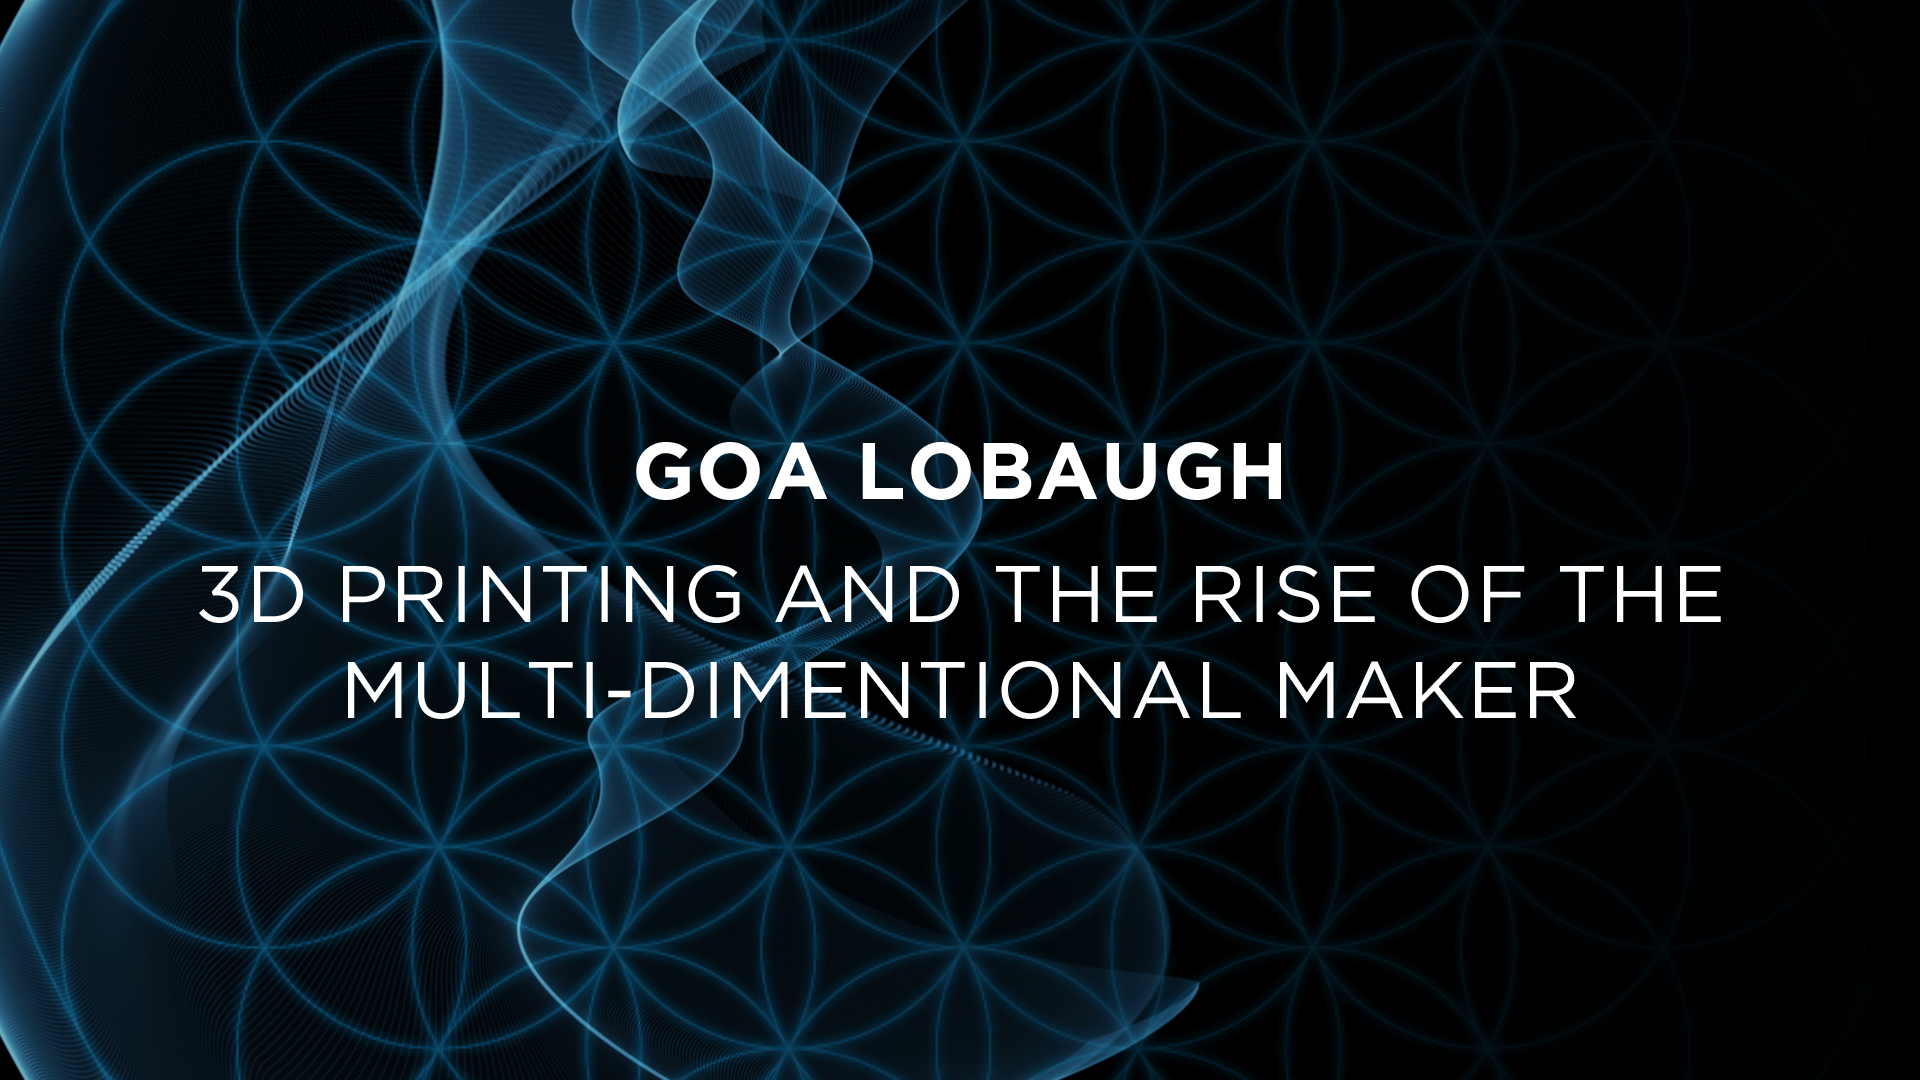 Goa Lobaugh : 3D PRINTING & THE RISE OF THE MULTI-DIMENSIONAL MAKER